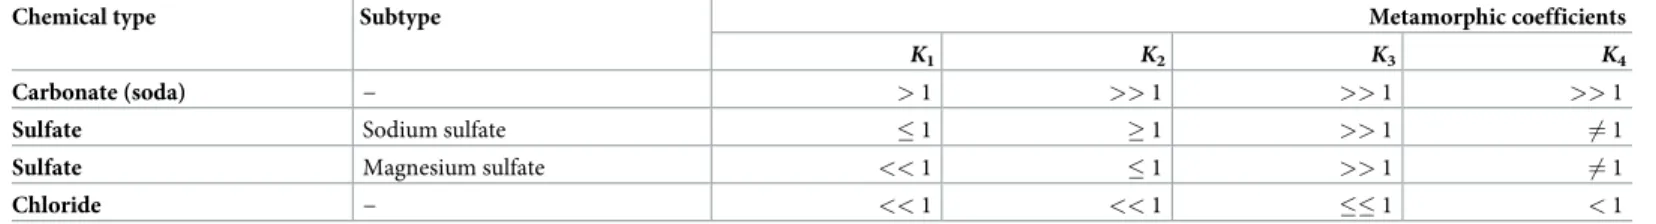 Table 1. Main features of “metamorphic coefficients” in different types of inland saline waters according to Valyashko [25].